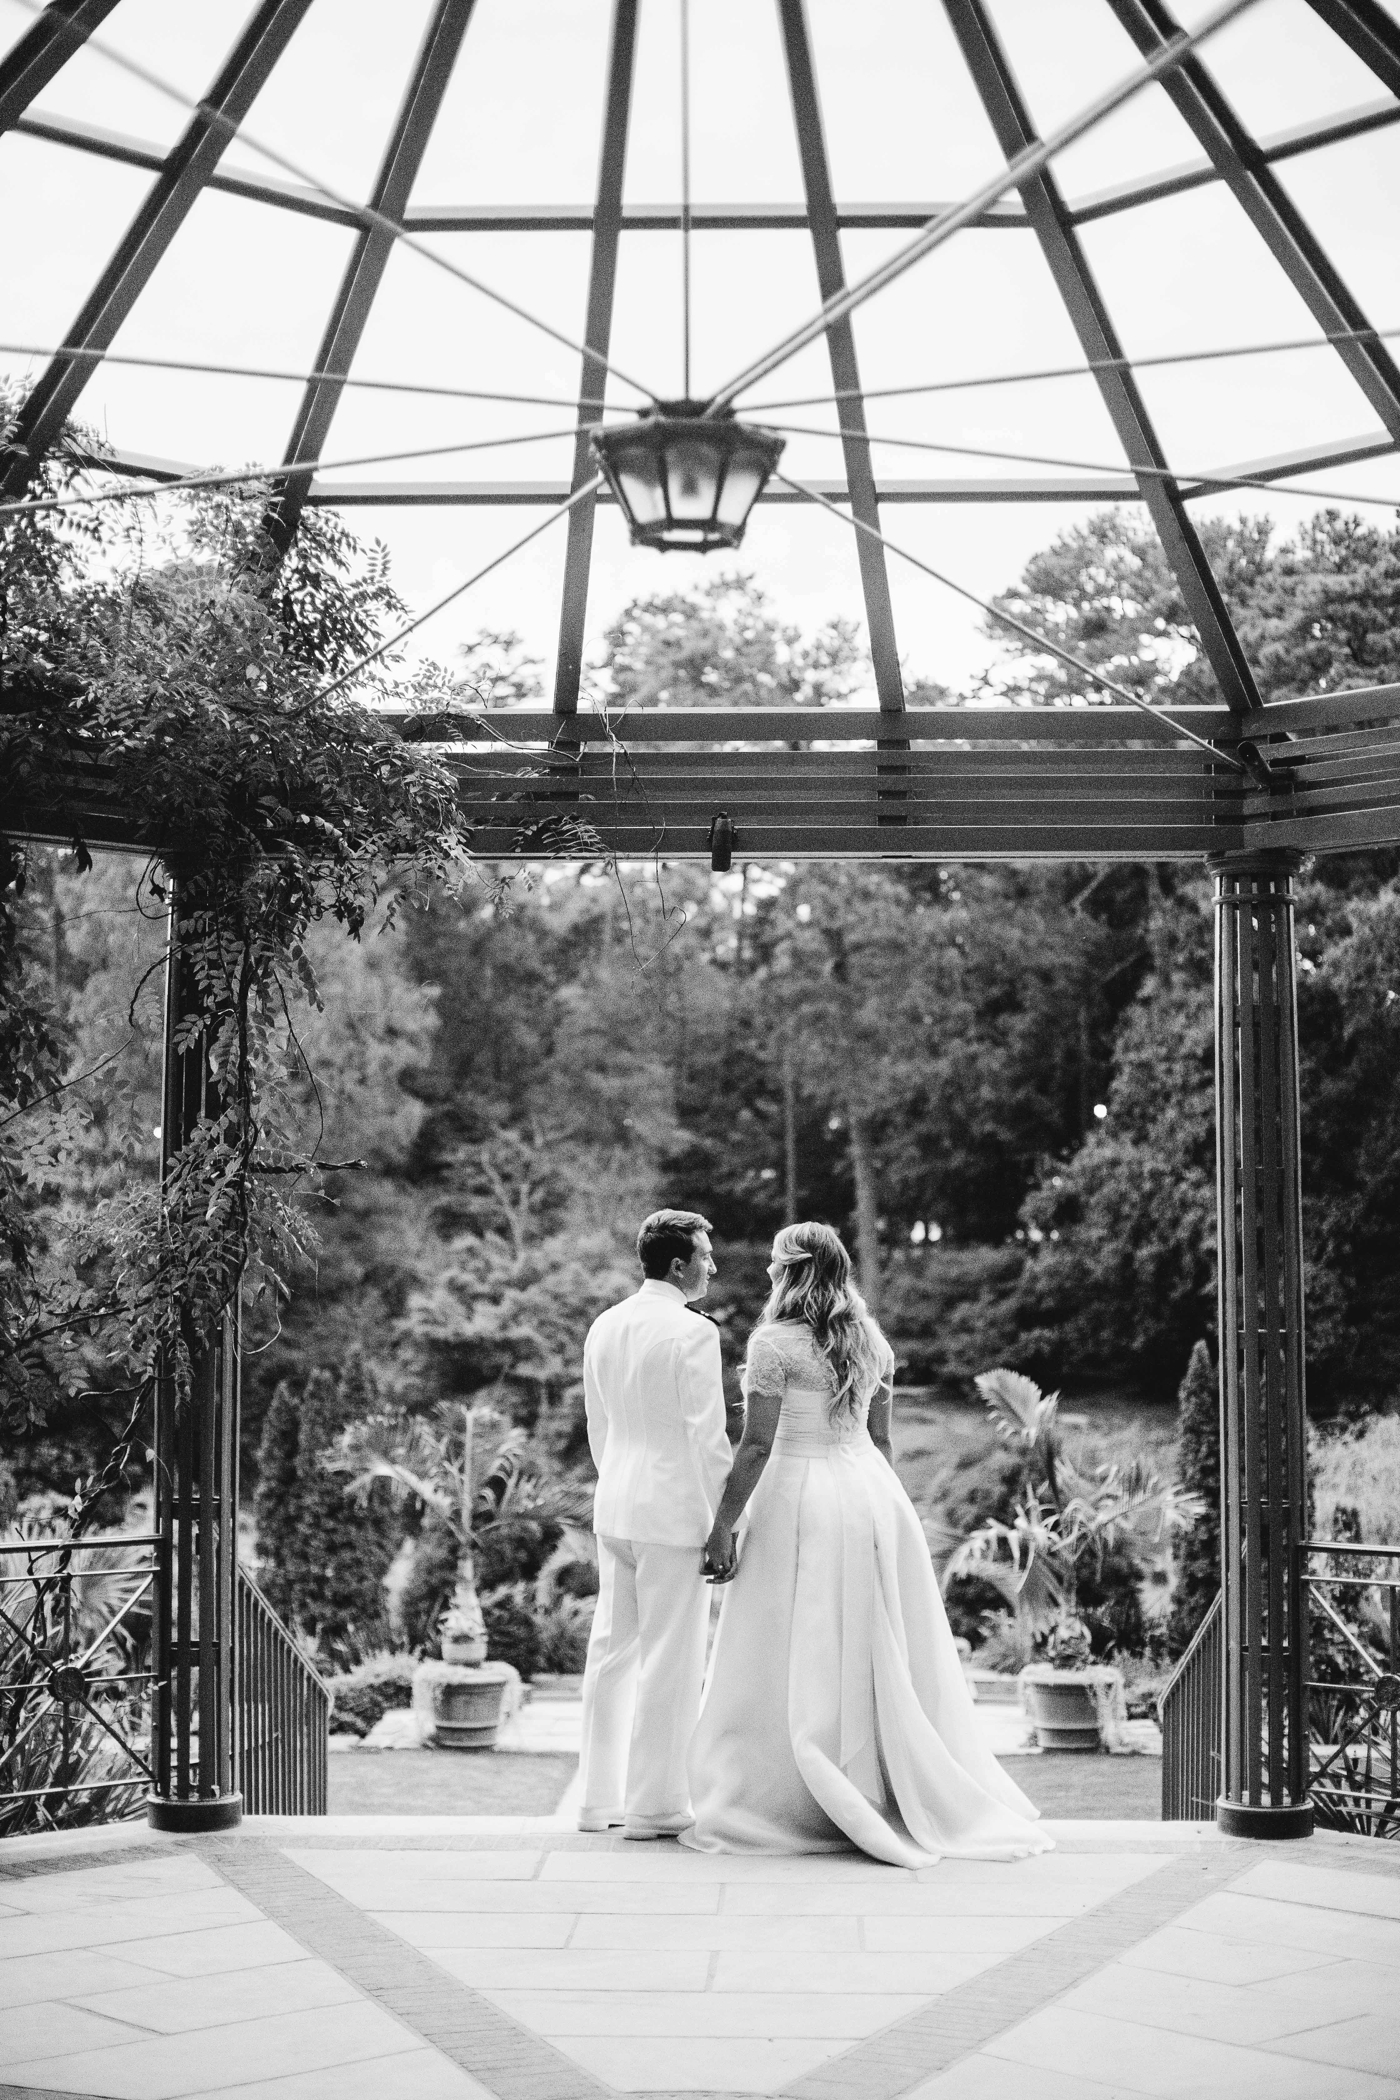 Garden wedding with Military inspiration | Izzy and Co.